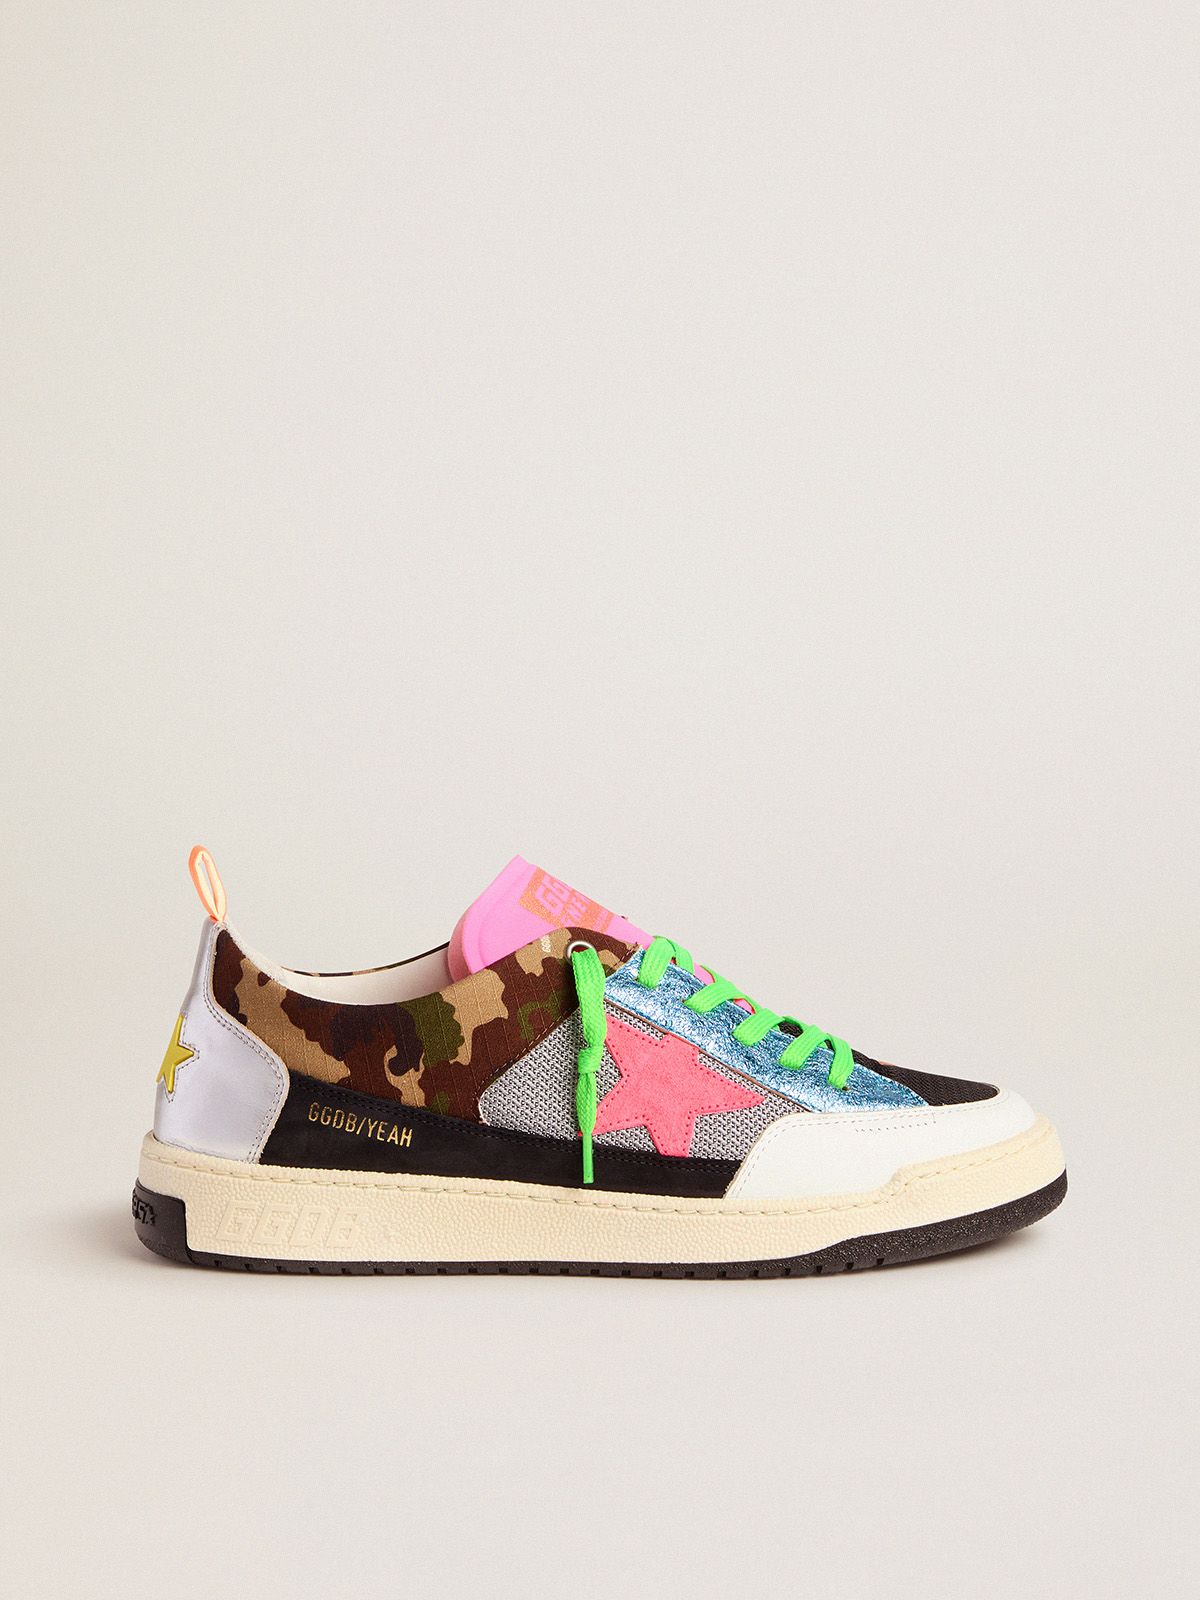 golden goose Men’s star camouflage Yeah sneakers with fuchsia